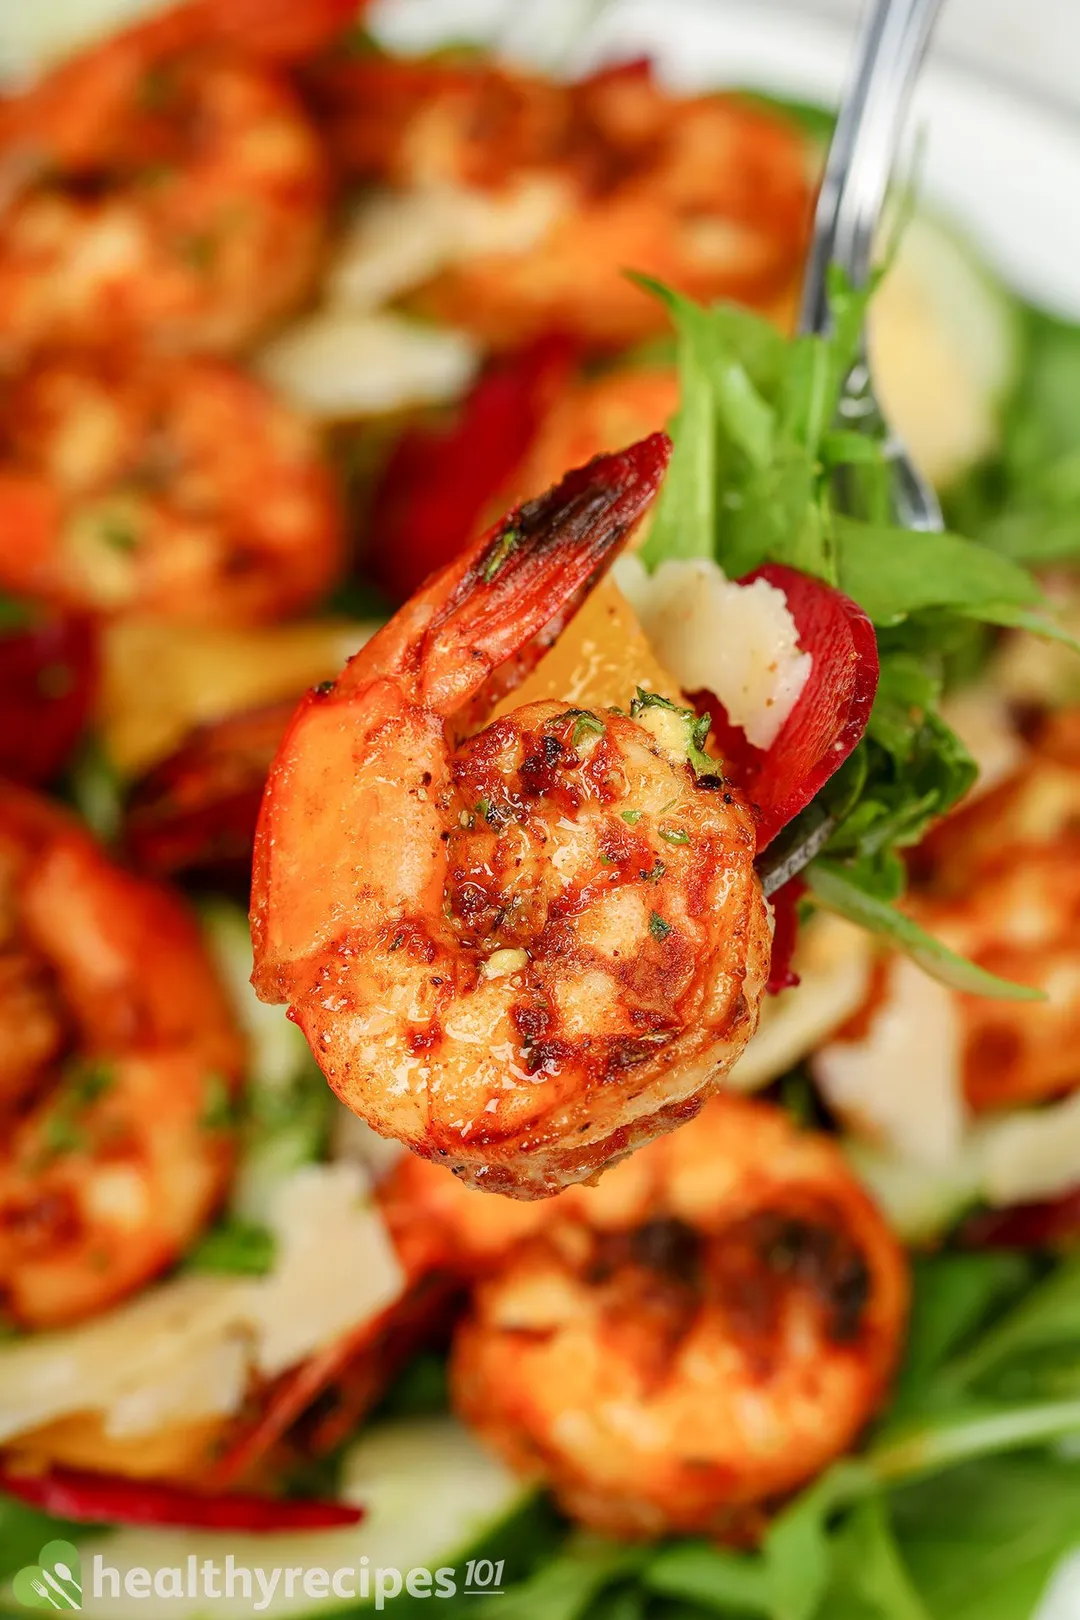 Reasons to Love Grilled Shrimp Recipes